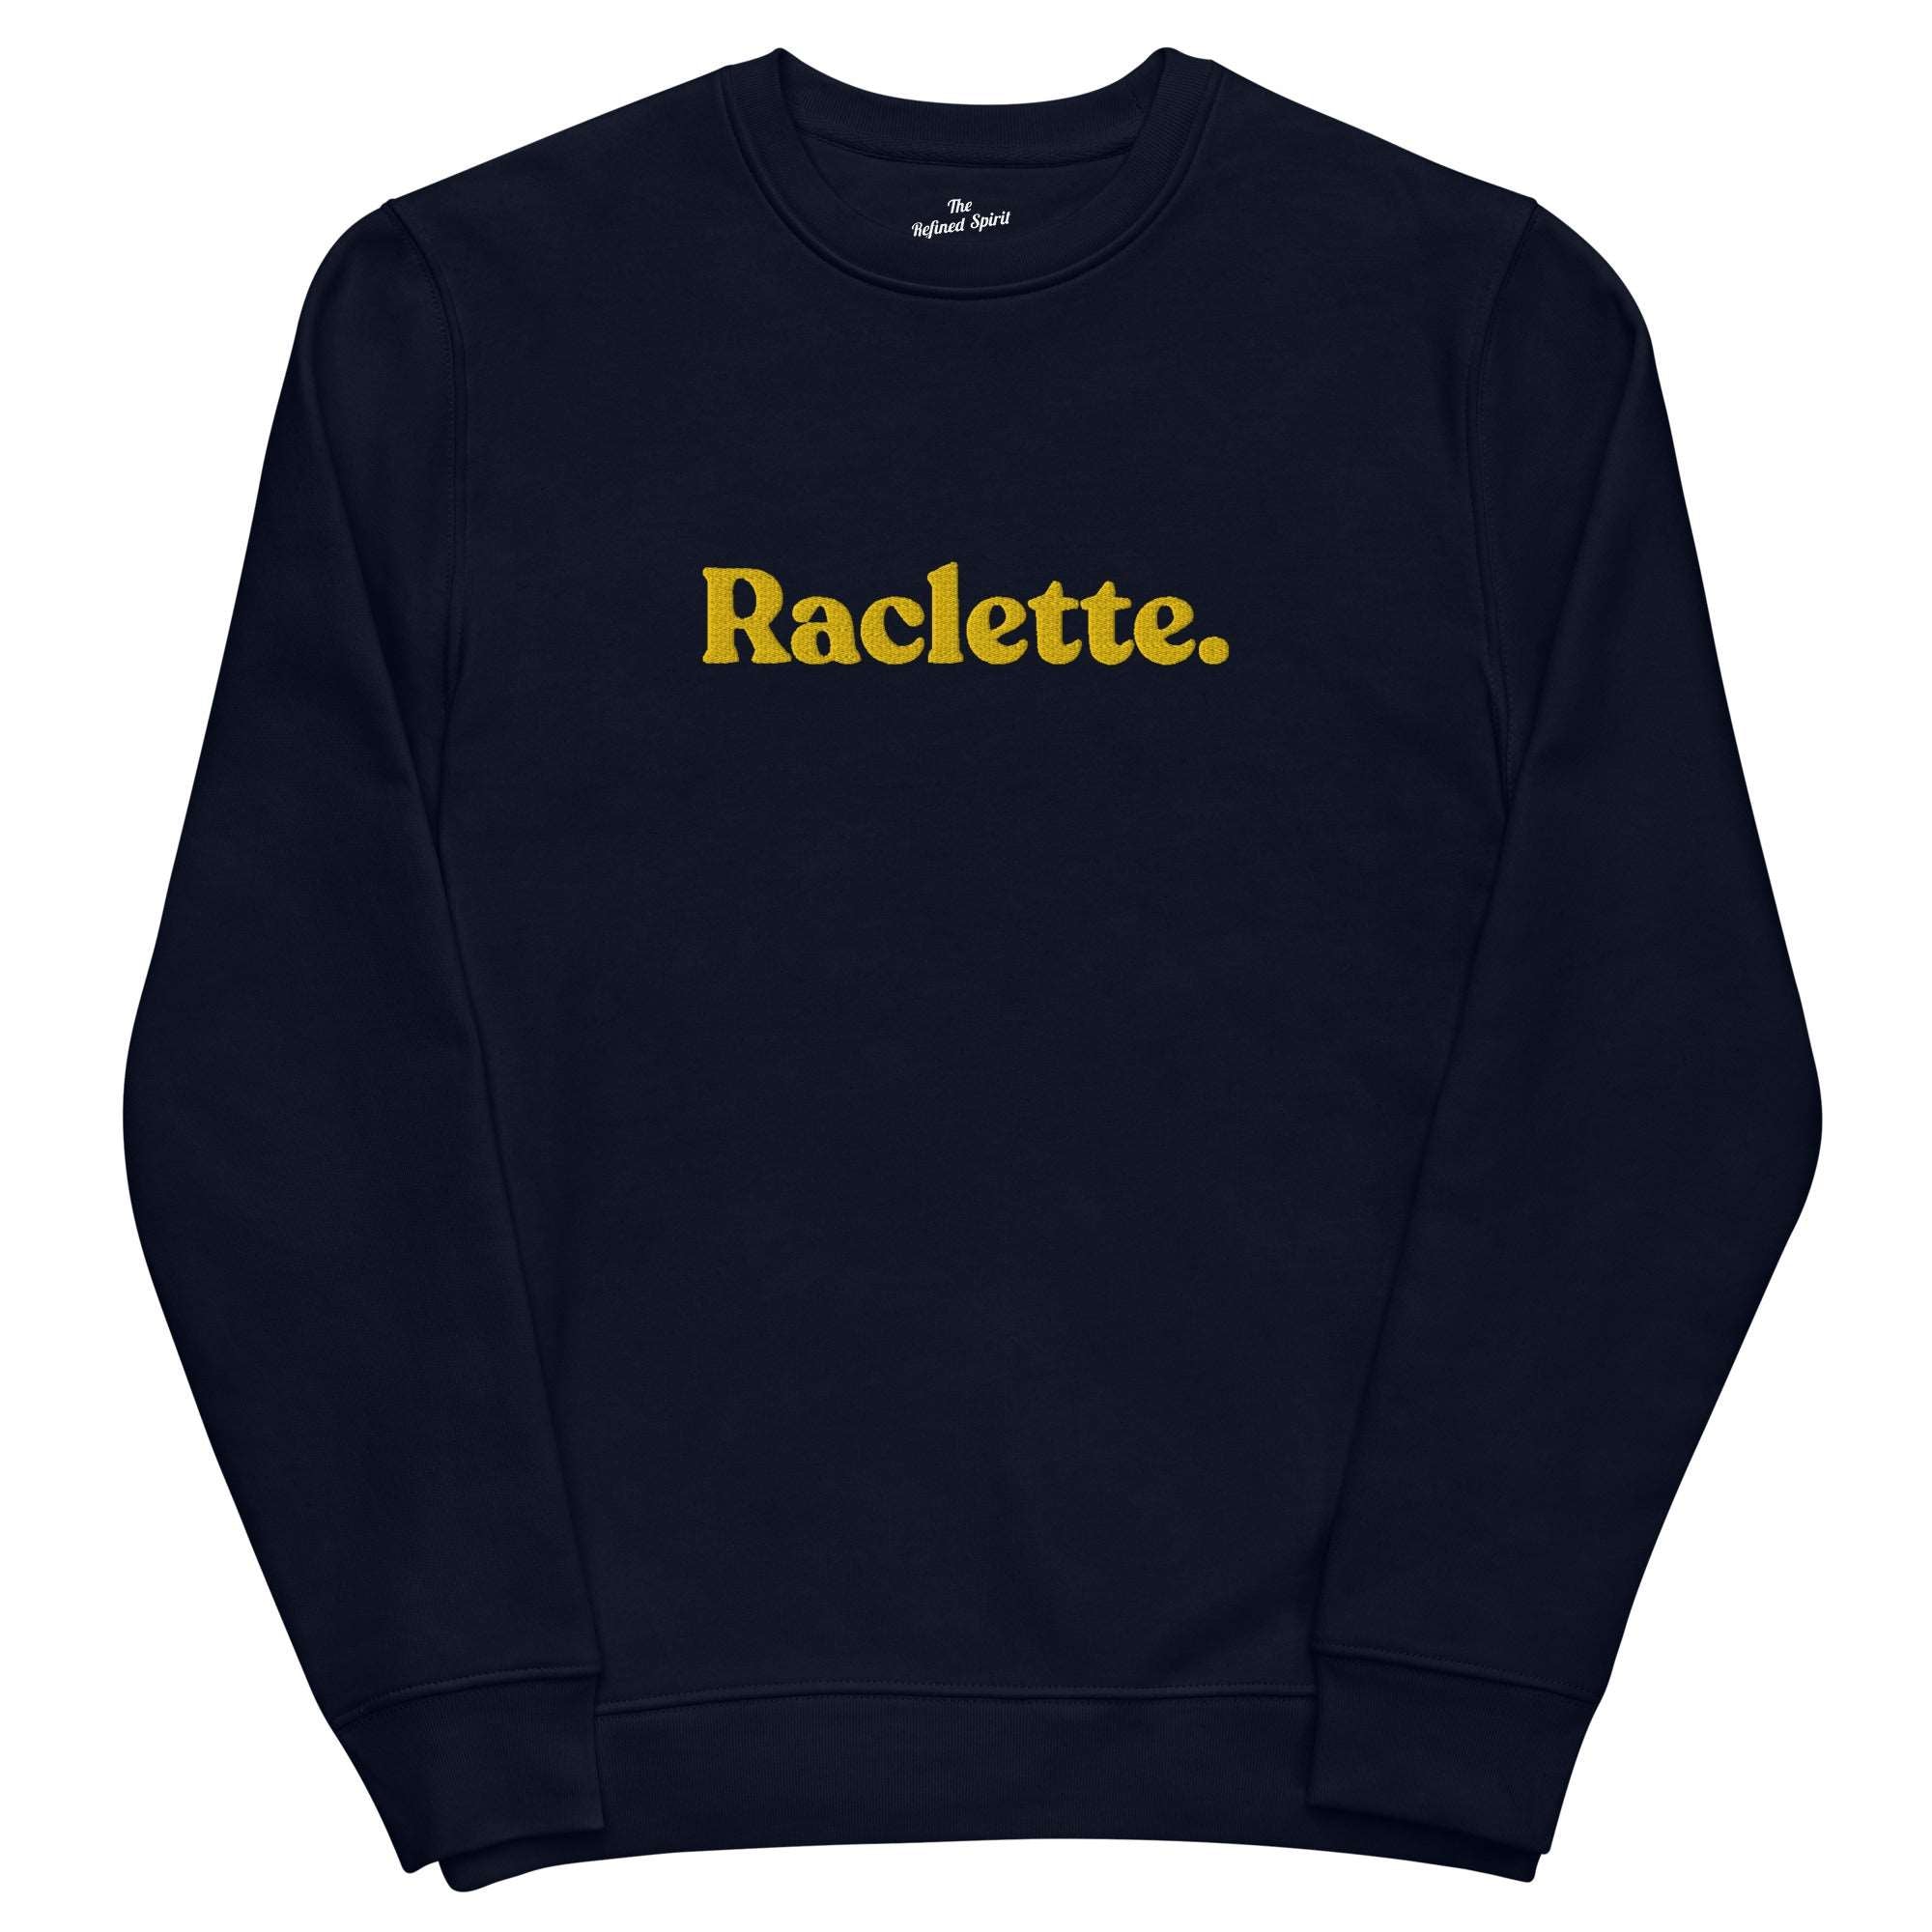 Raclette - Organic Embroidered Sweatshirt - The Refined Spirit